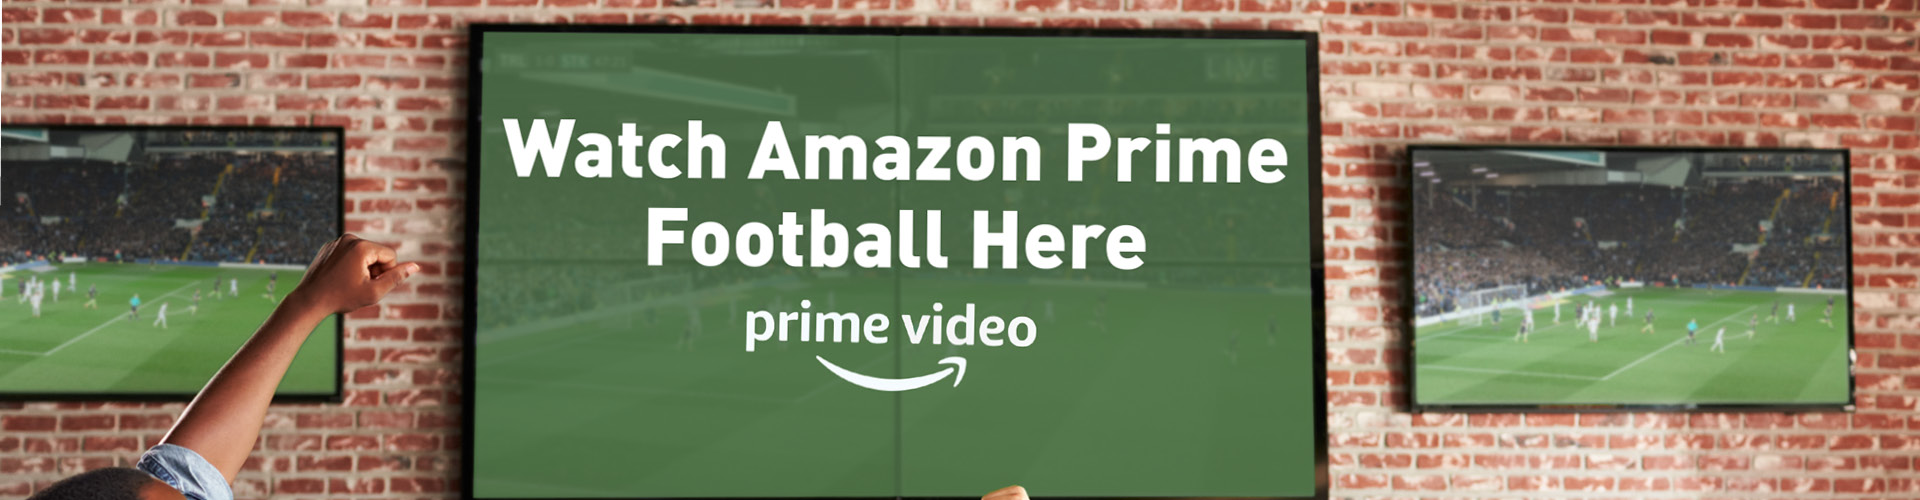 Watch Amazon Prime football at Mackintosh Hotel in Cardiff